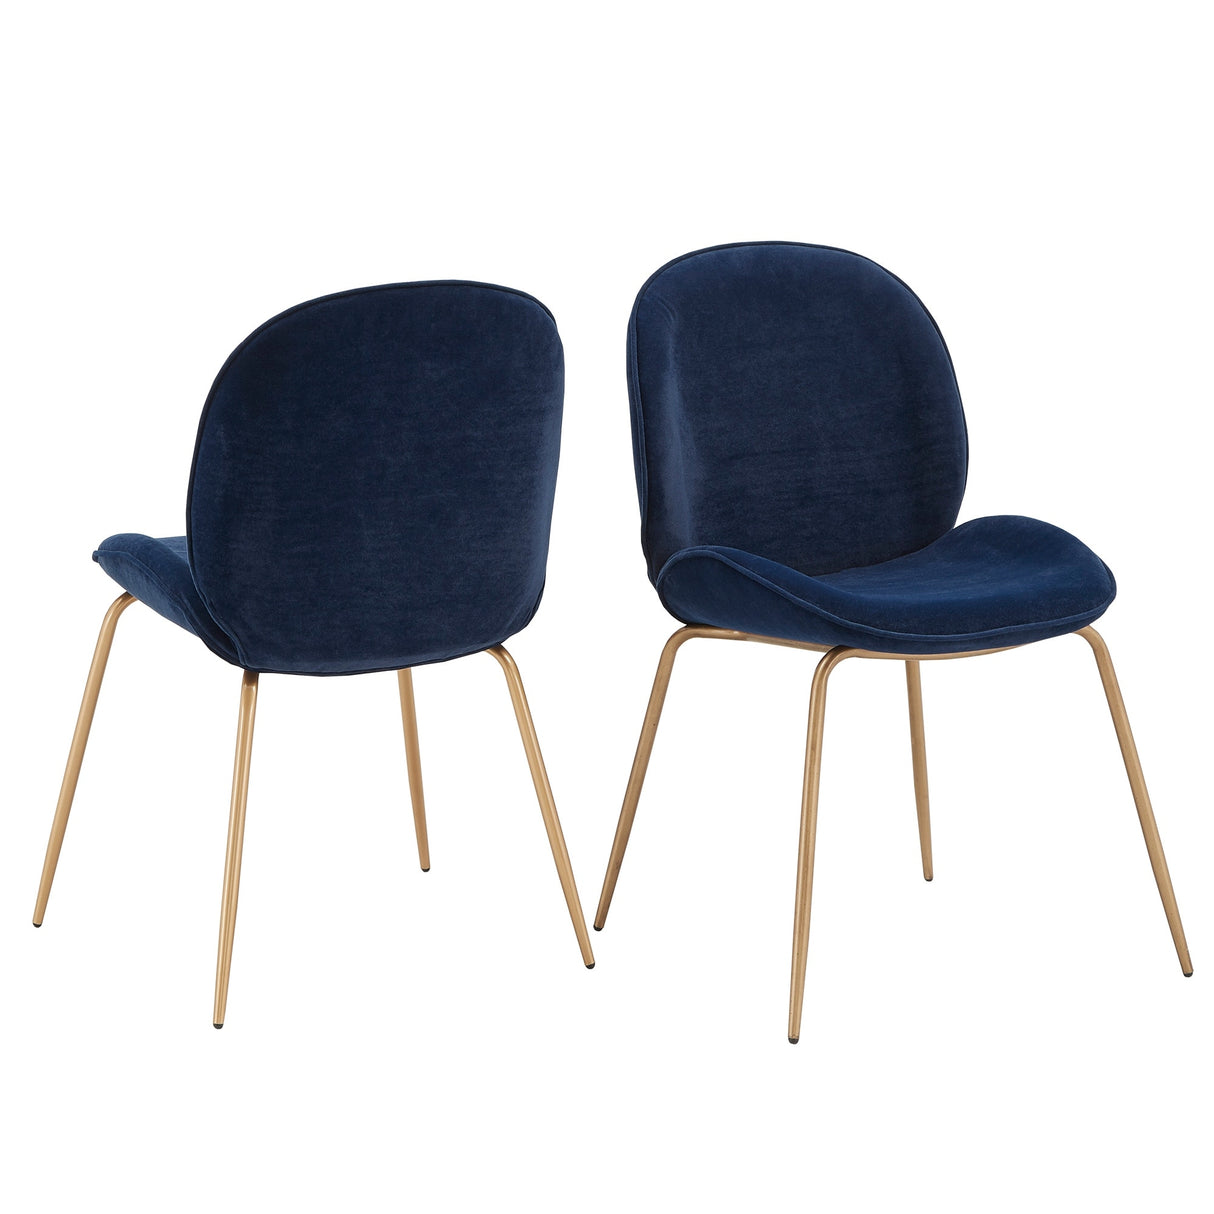 Veronika Velvet Dining Chairs (Set of 2) by iNSPIRE Q Bold